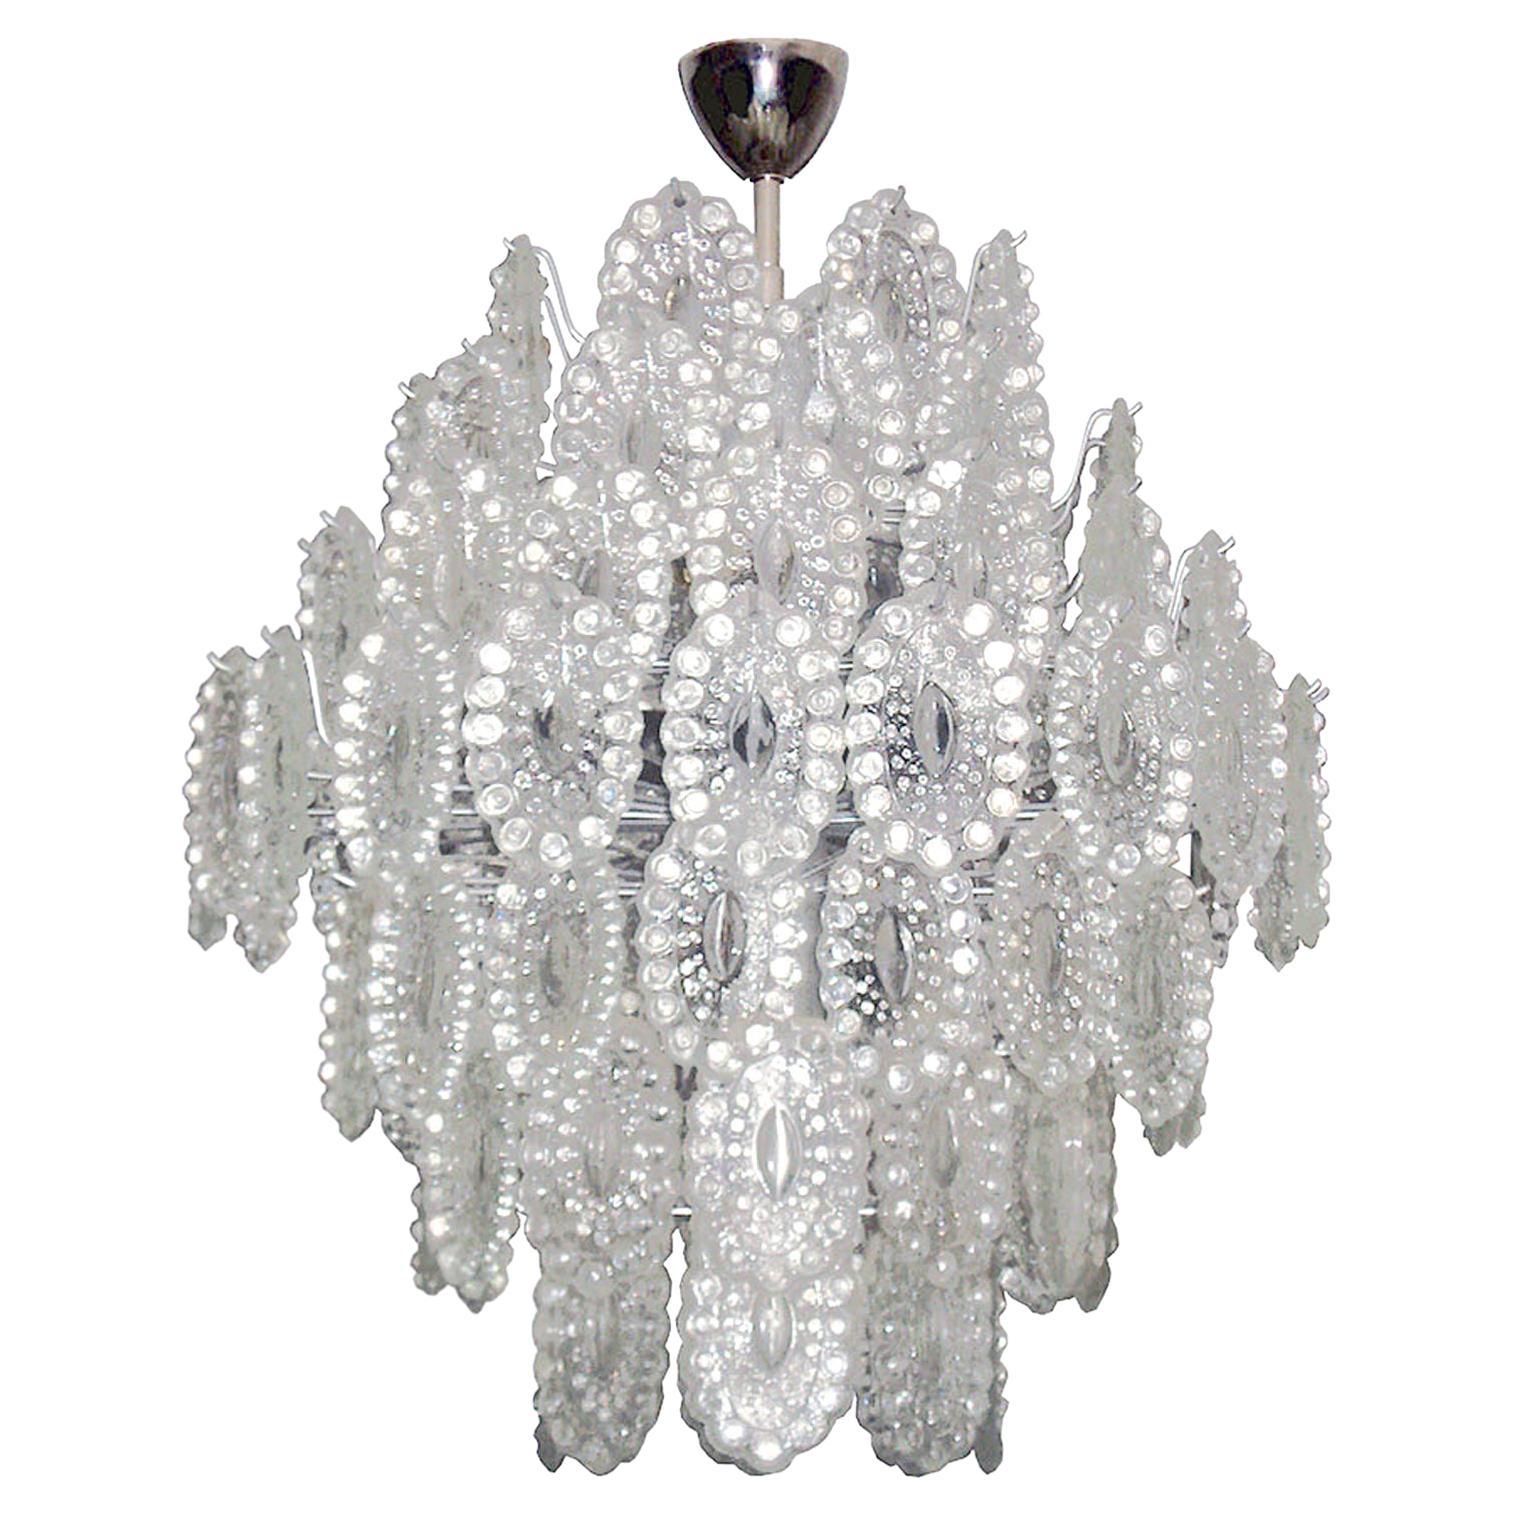 Italian Crystal Glass Chandelier in the Style of Mazzega, 1 of 2 For Sale